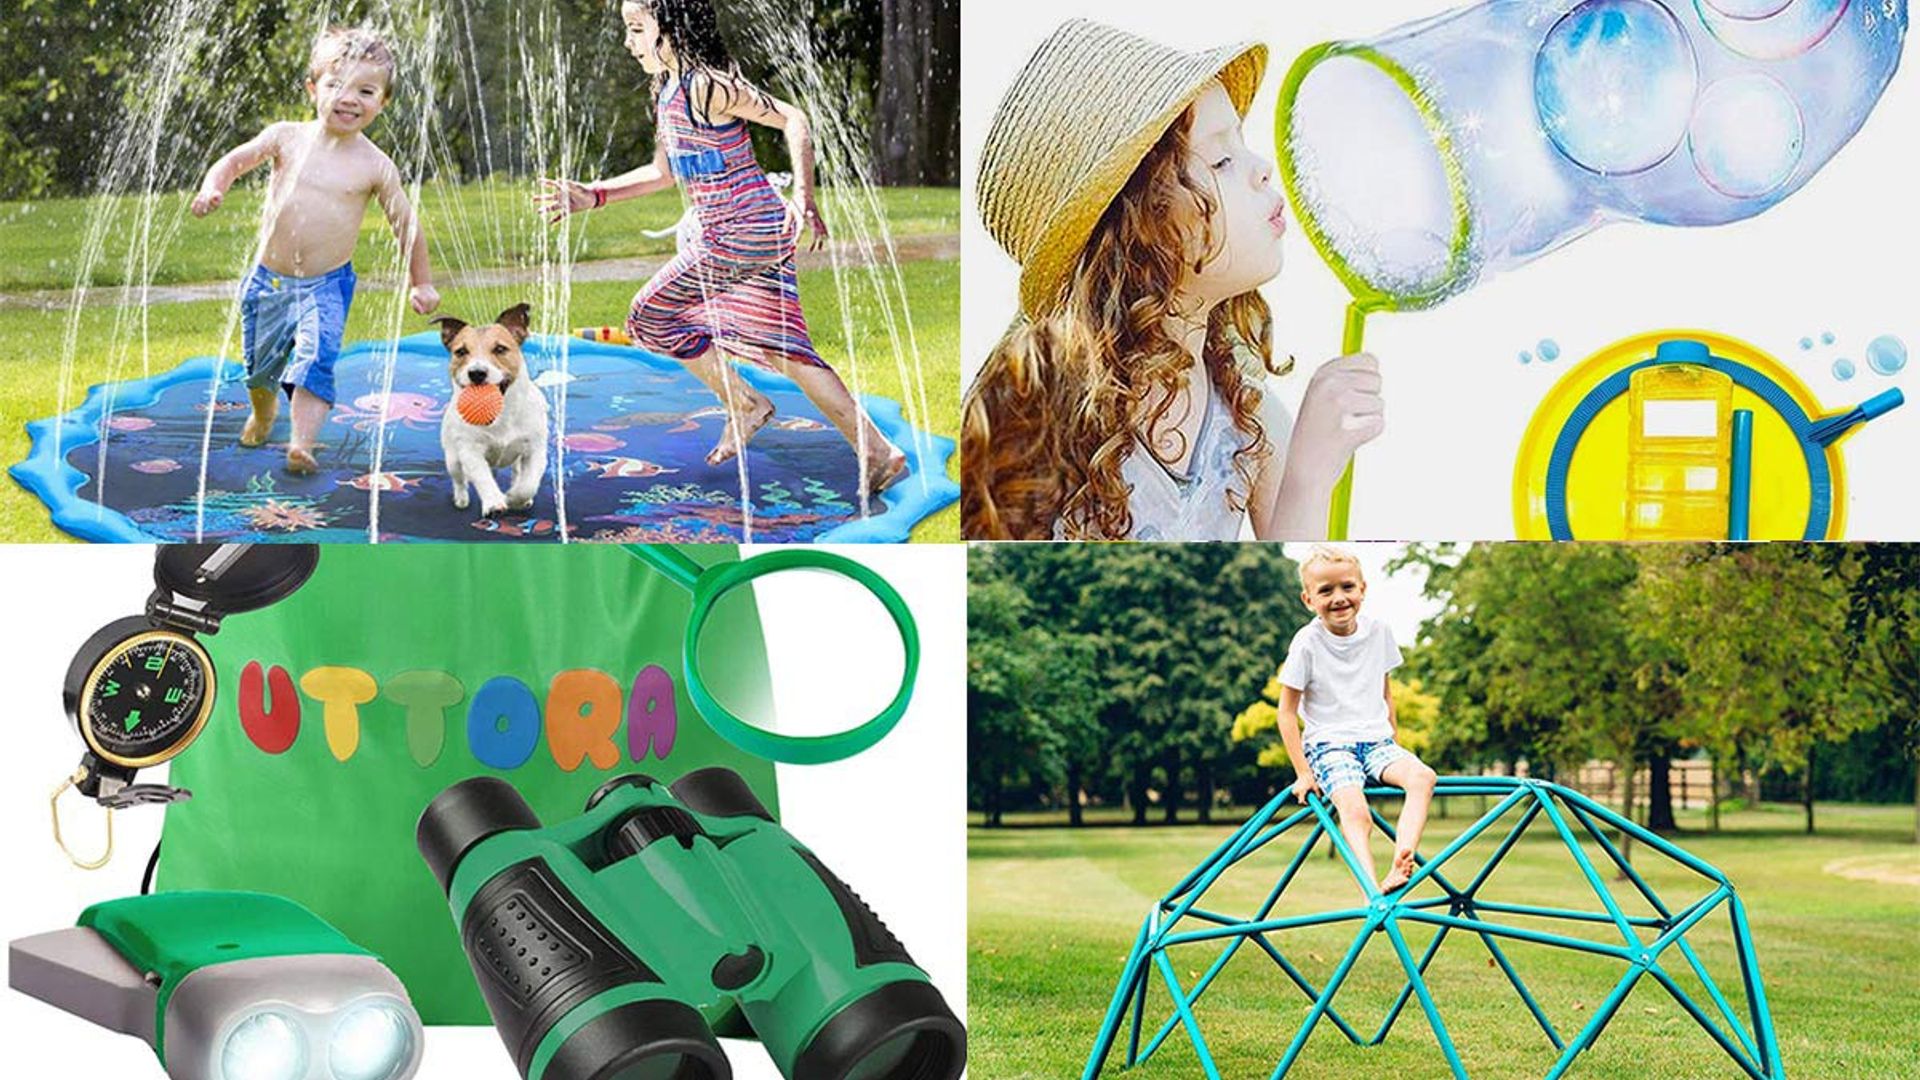 14 Equipment Free Outdoor Games Your Kids Will Go Crazy For! - Sunshine  Whispers